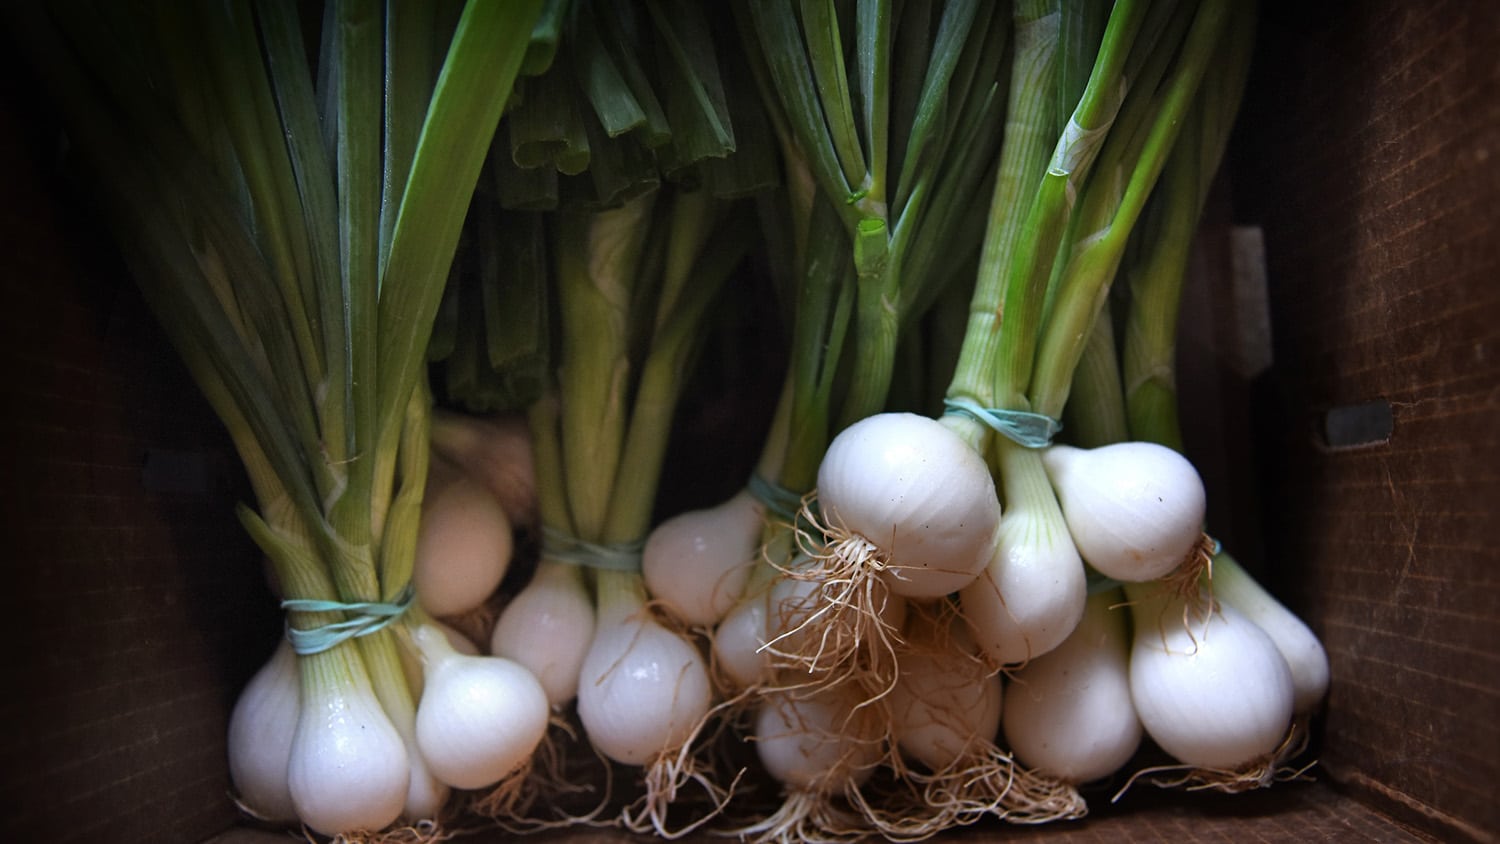 Bundles of spring onions in a box